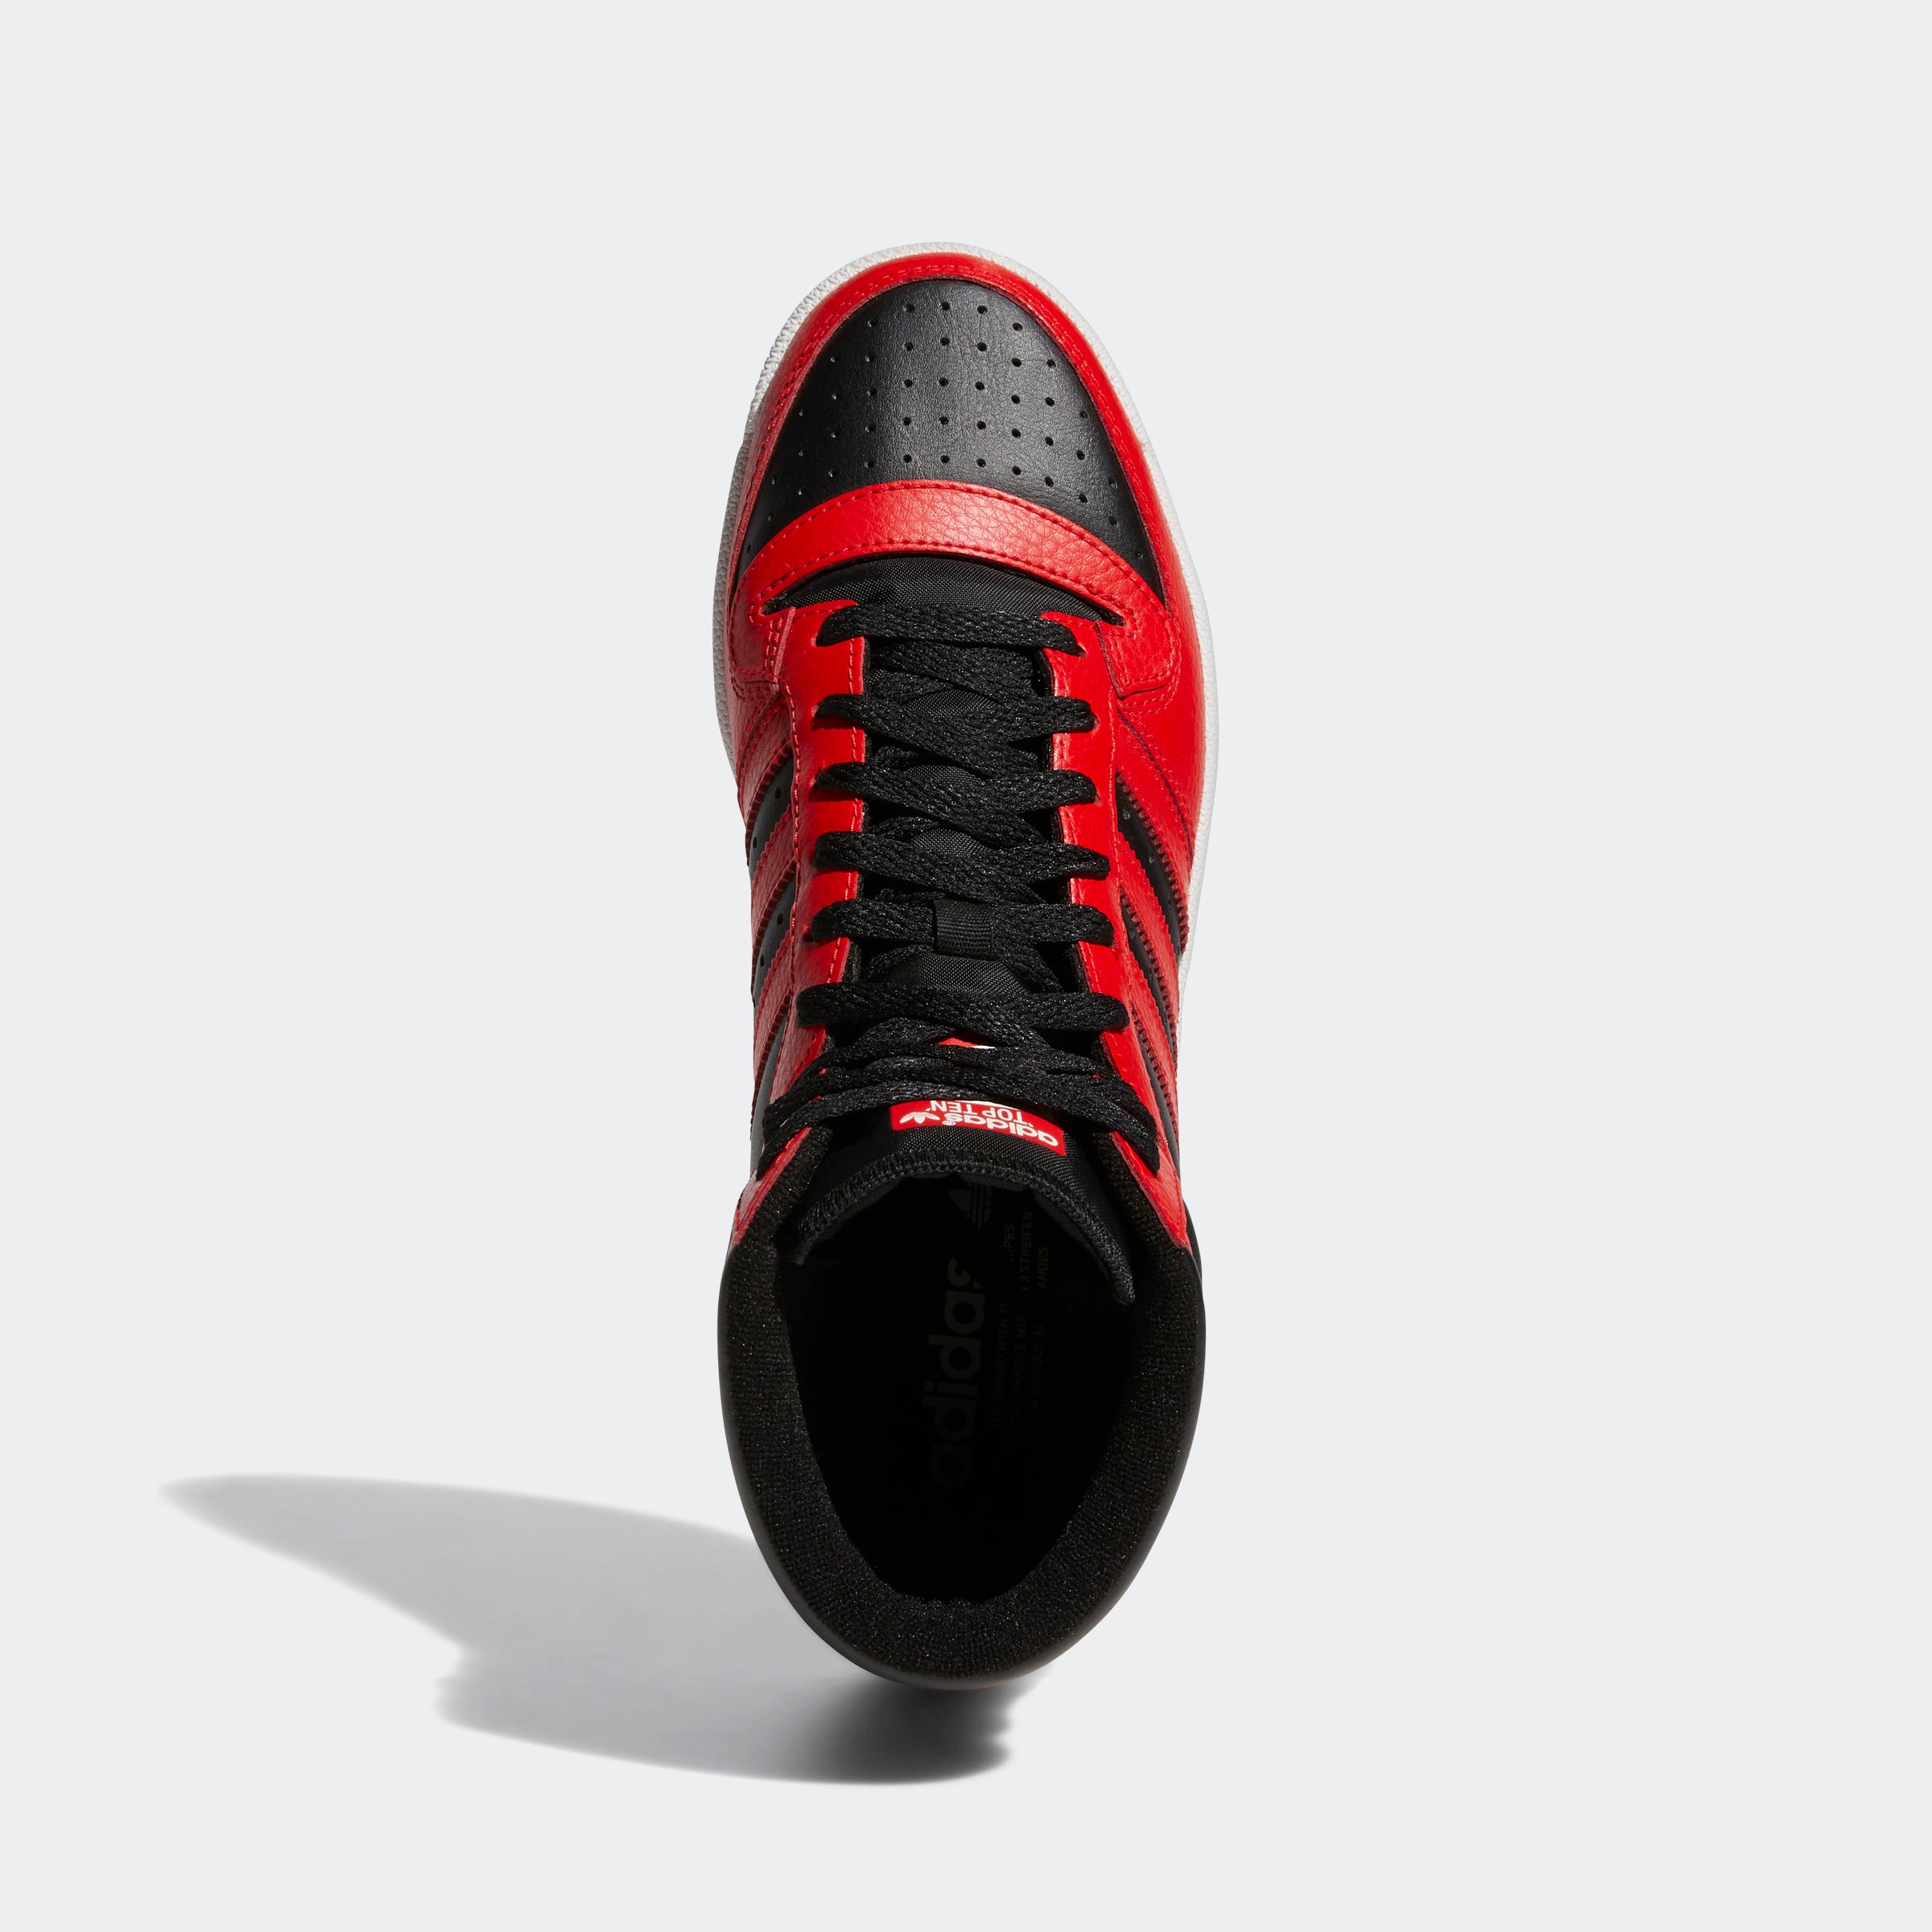 adidas Top Shoes Black Red GX0756 Chicago Sports